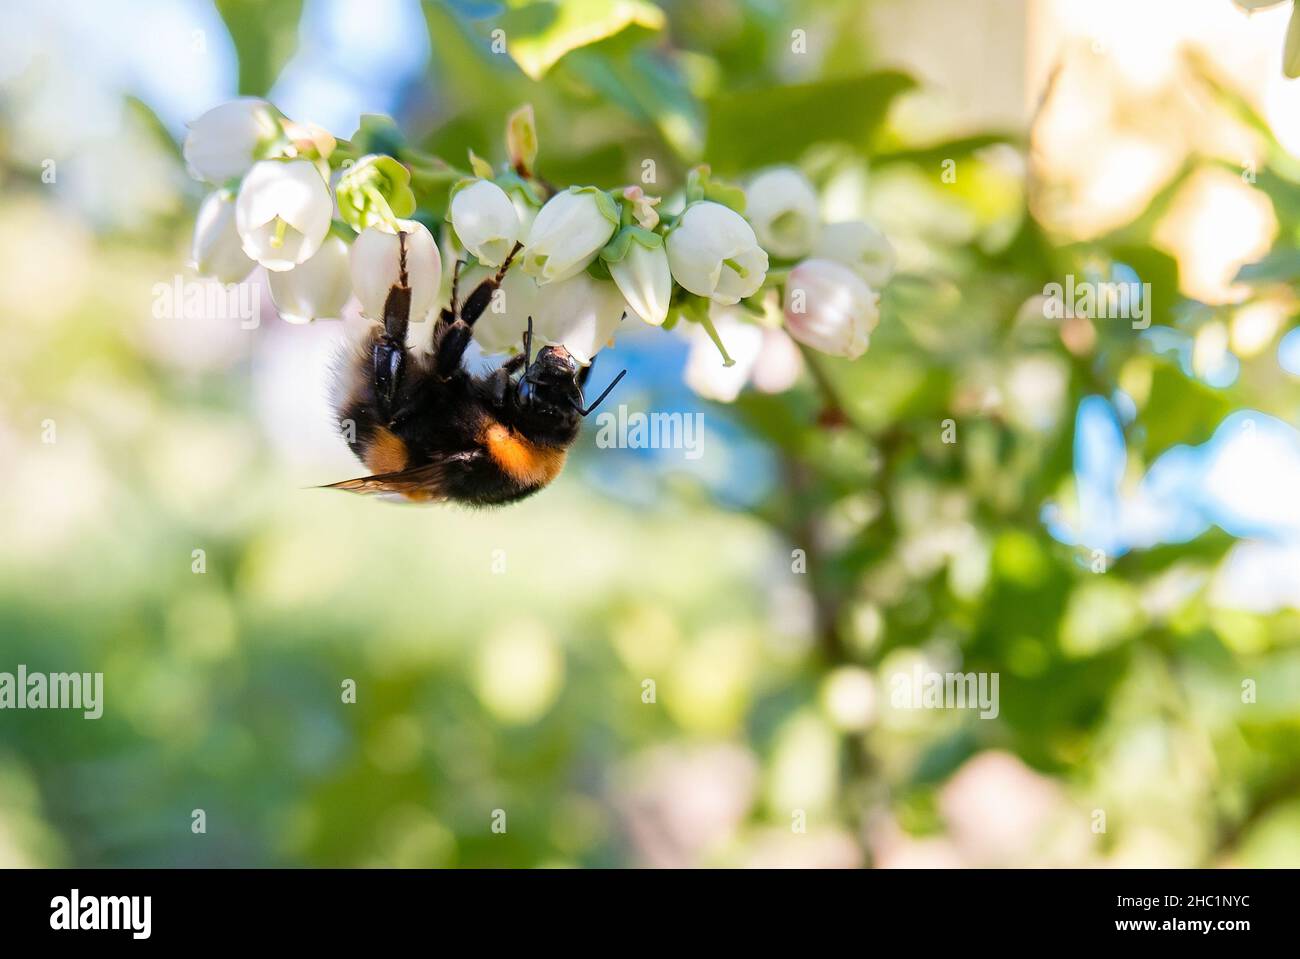 A bumblebee collects nectar from blueberry flowers Stock Photo